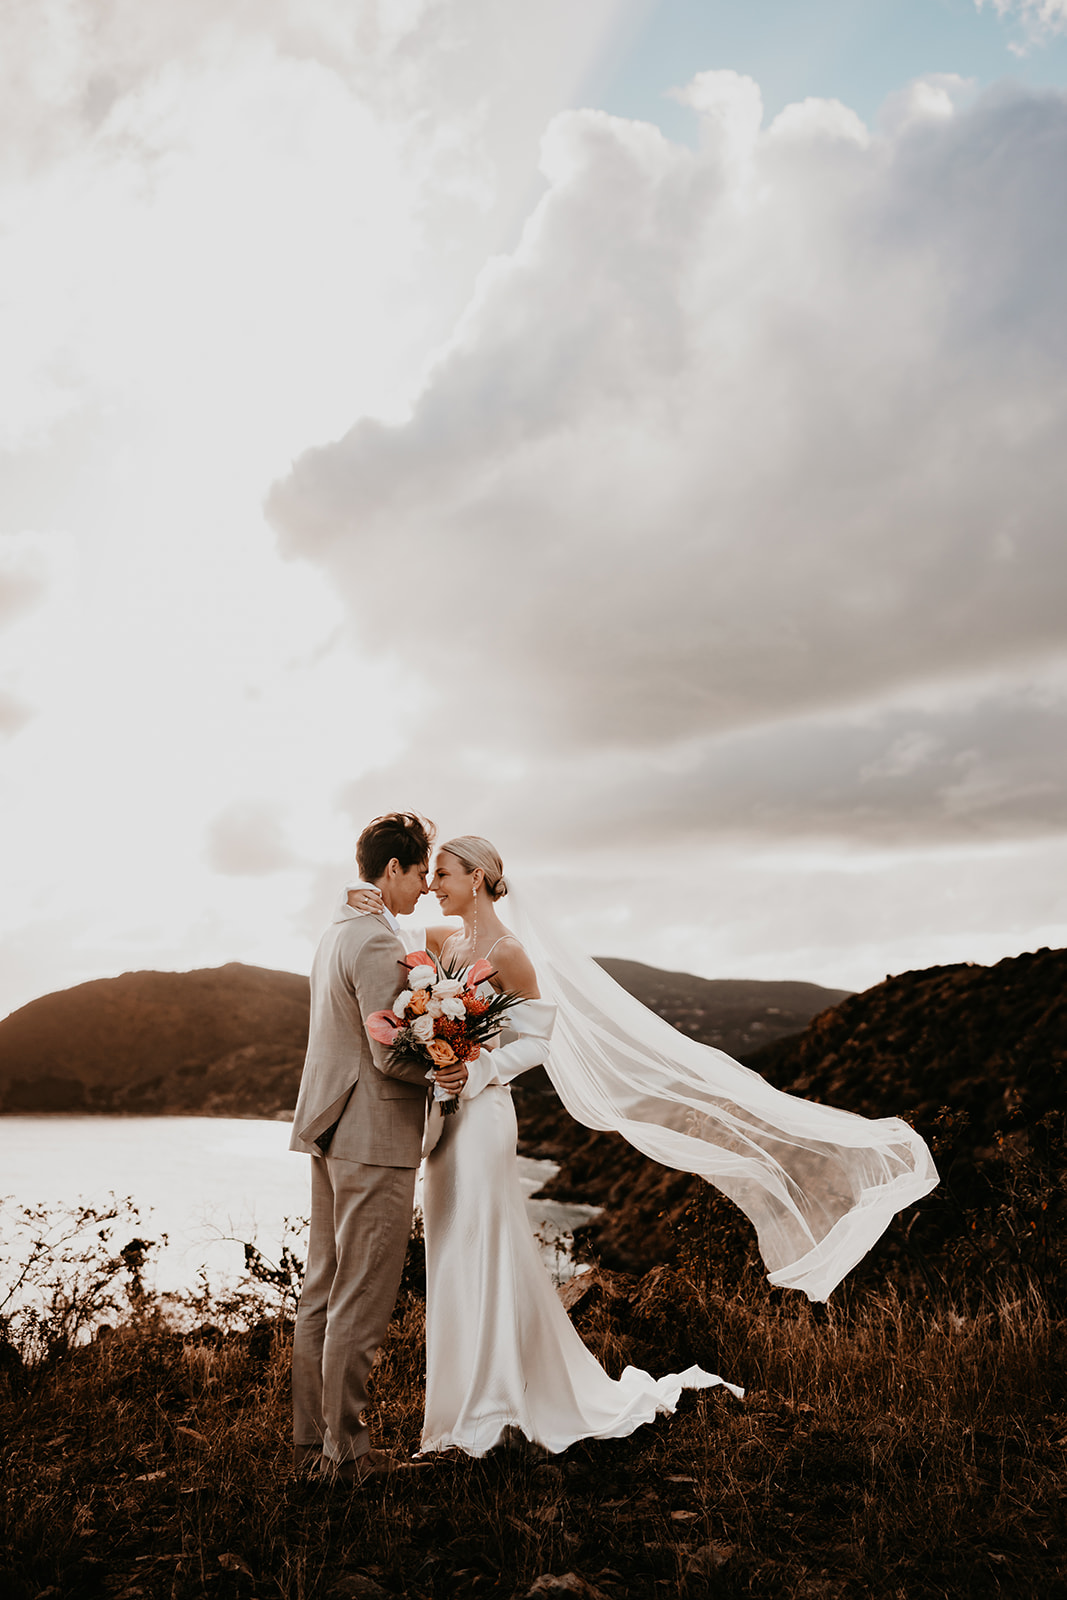 Breathtaking sunset wedding portrait with the British Virgin Islands as the backdrop